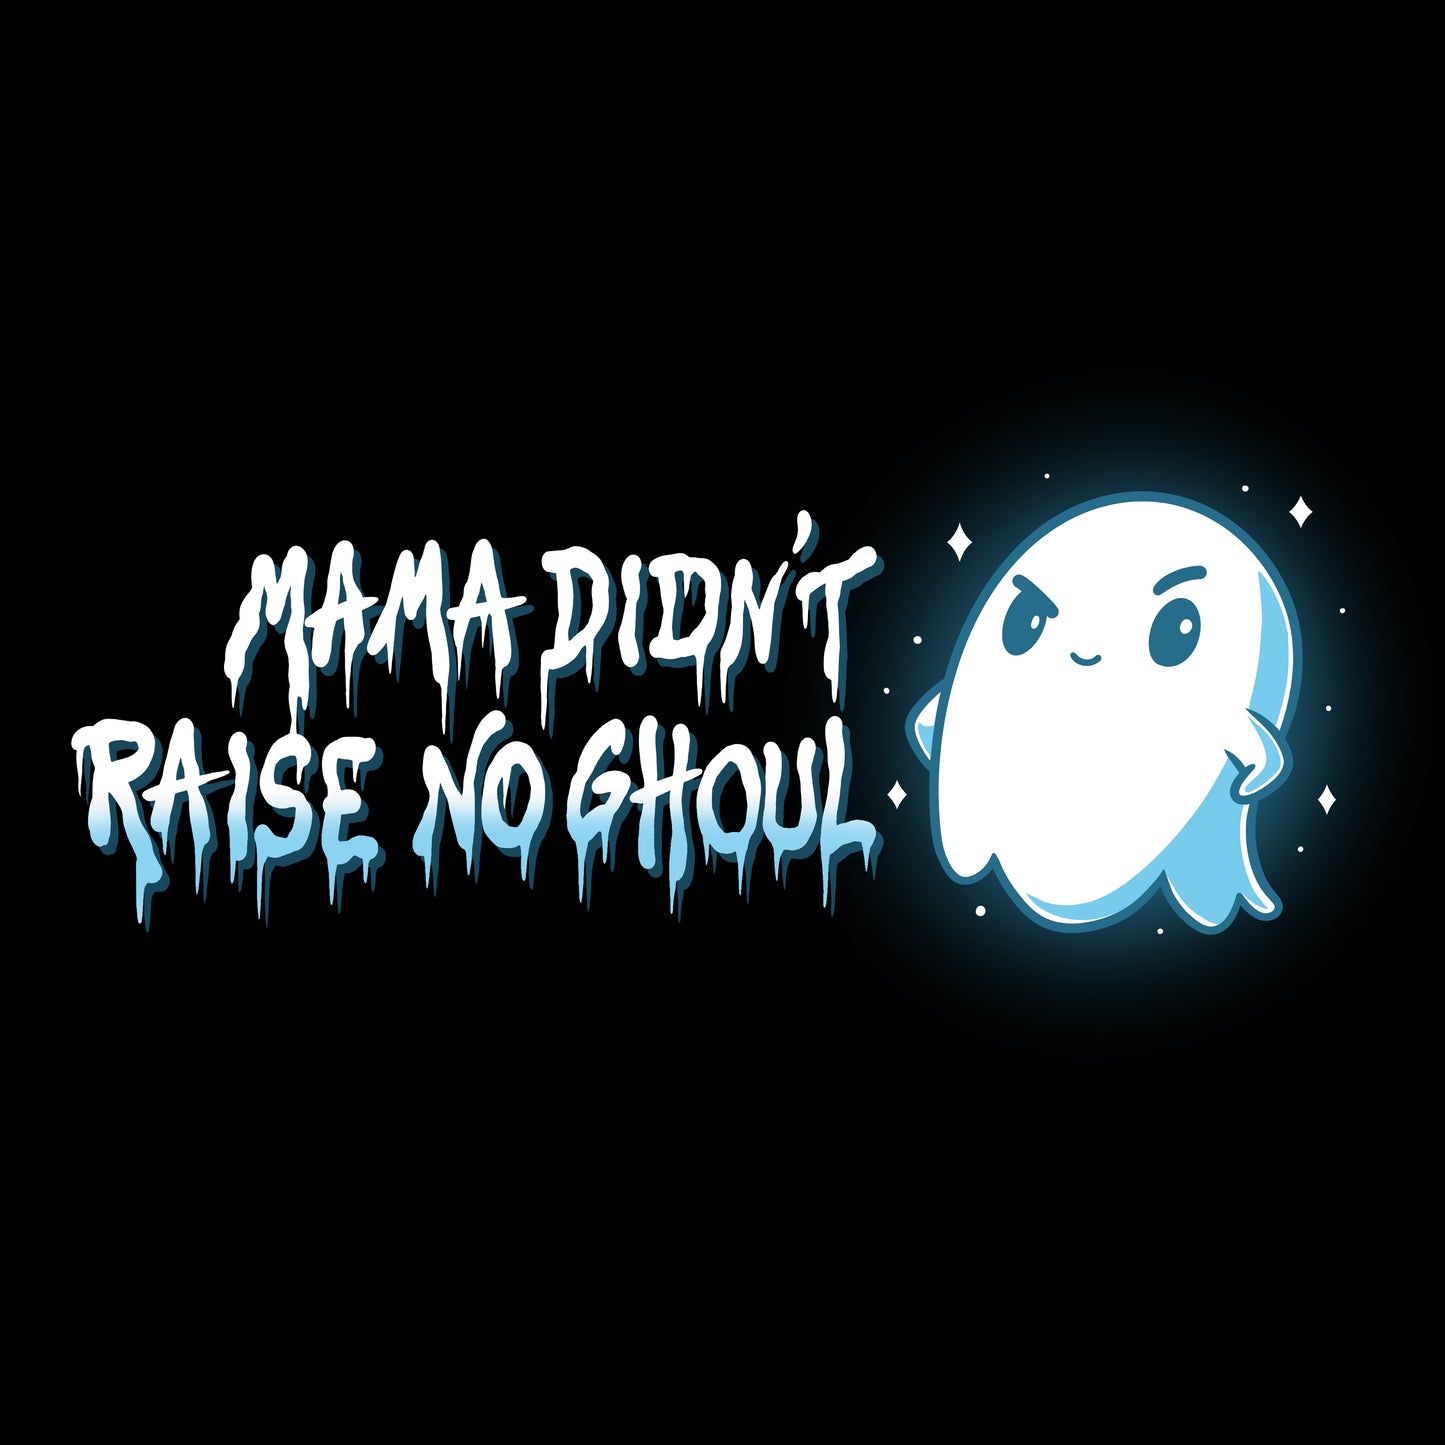 Limited stock Mama Didn't Raise No Ghoul T-shirt by TeeTurtle.